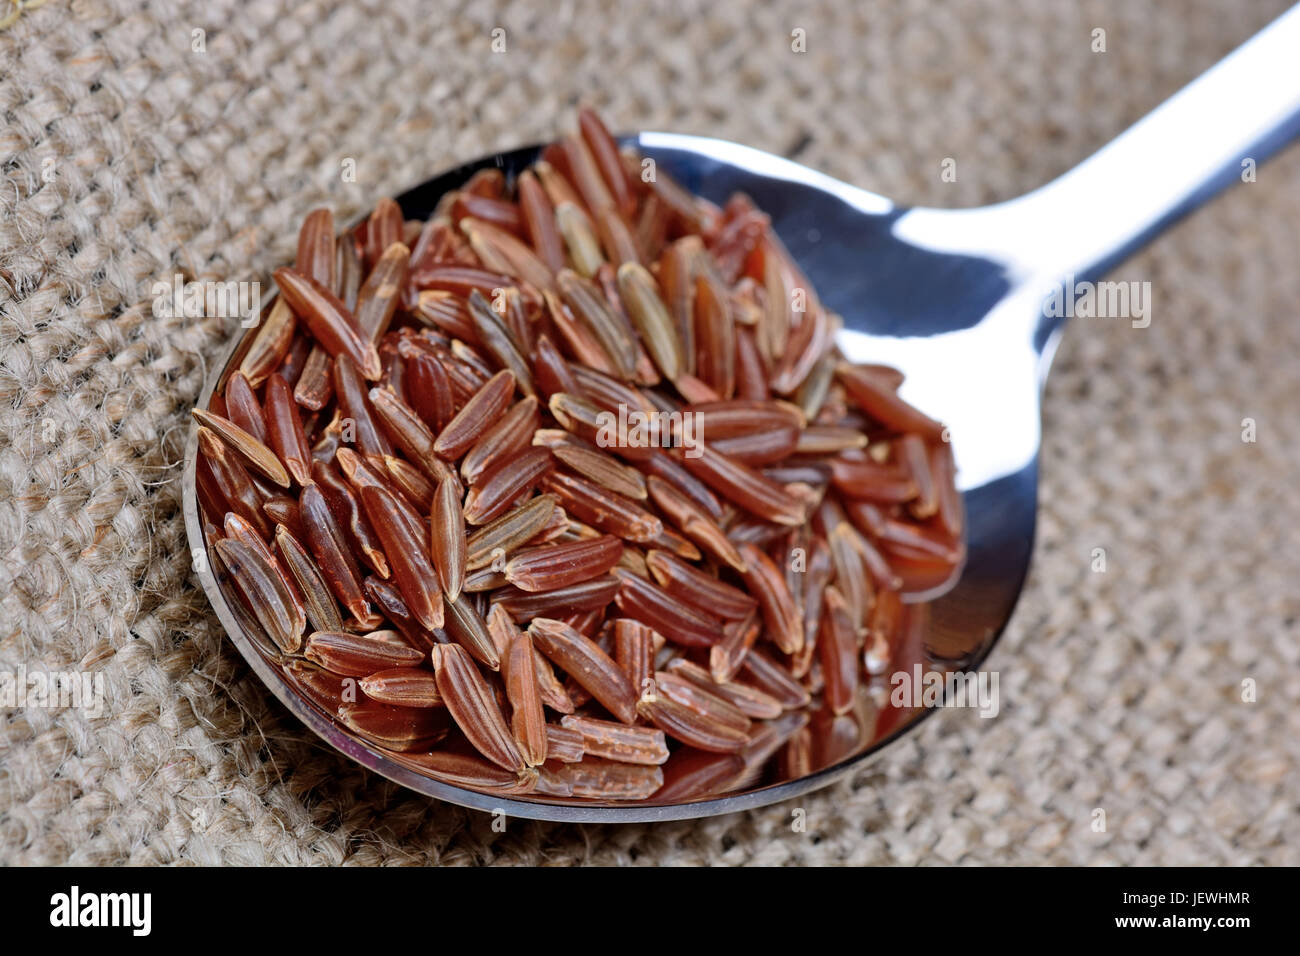 Red rice in a spoon on table Stock Photo